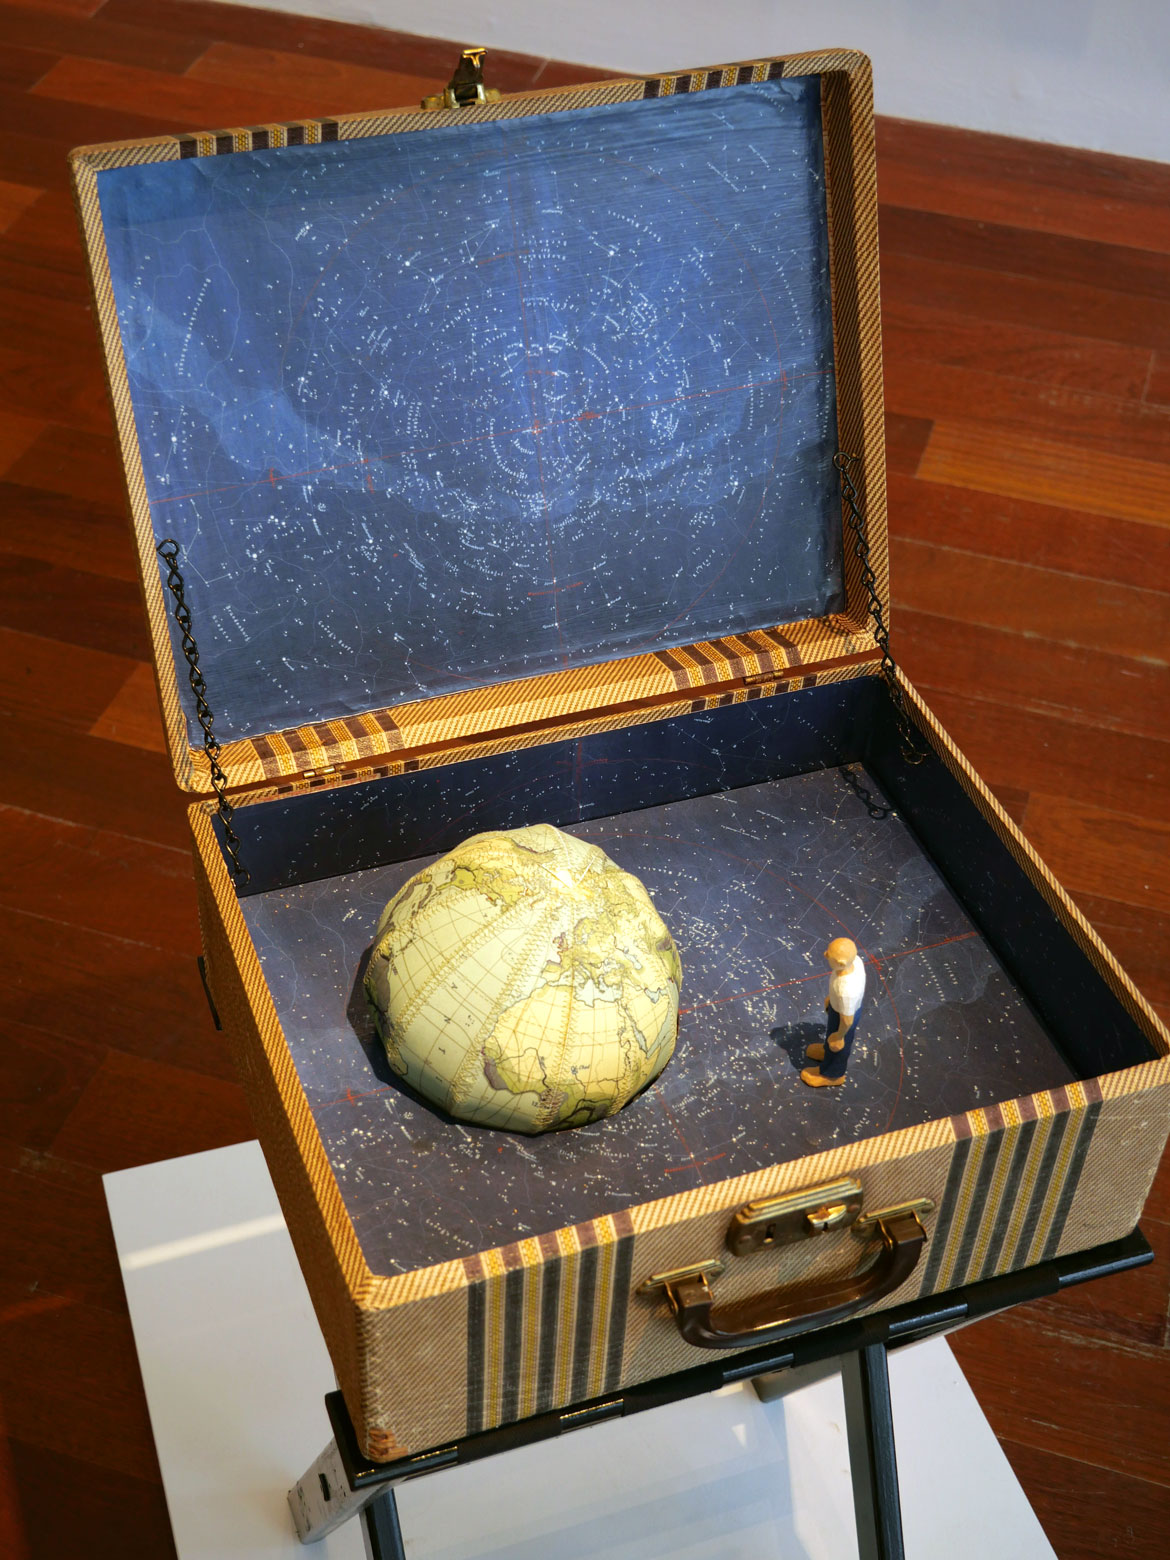 Jessica Straus, "Missing You," in 2024 exhibition "Packing for Mars" at Boston Sculptors Gallery.